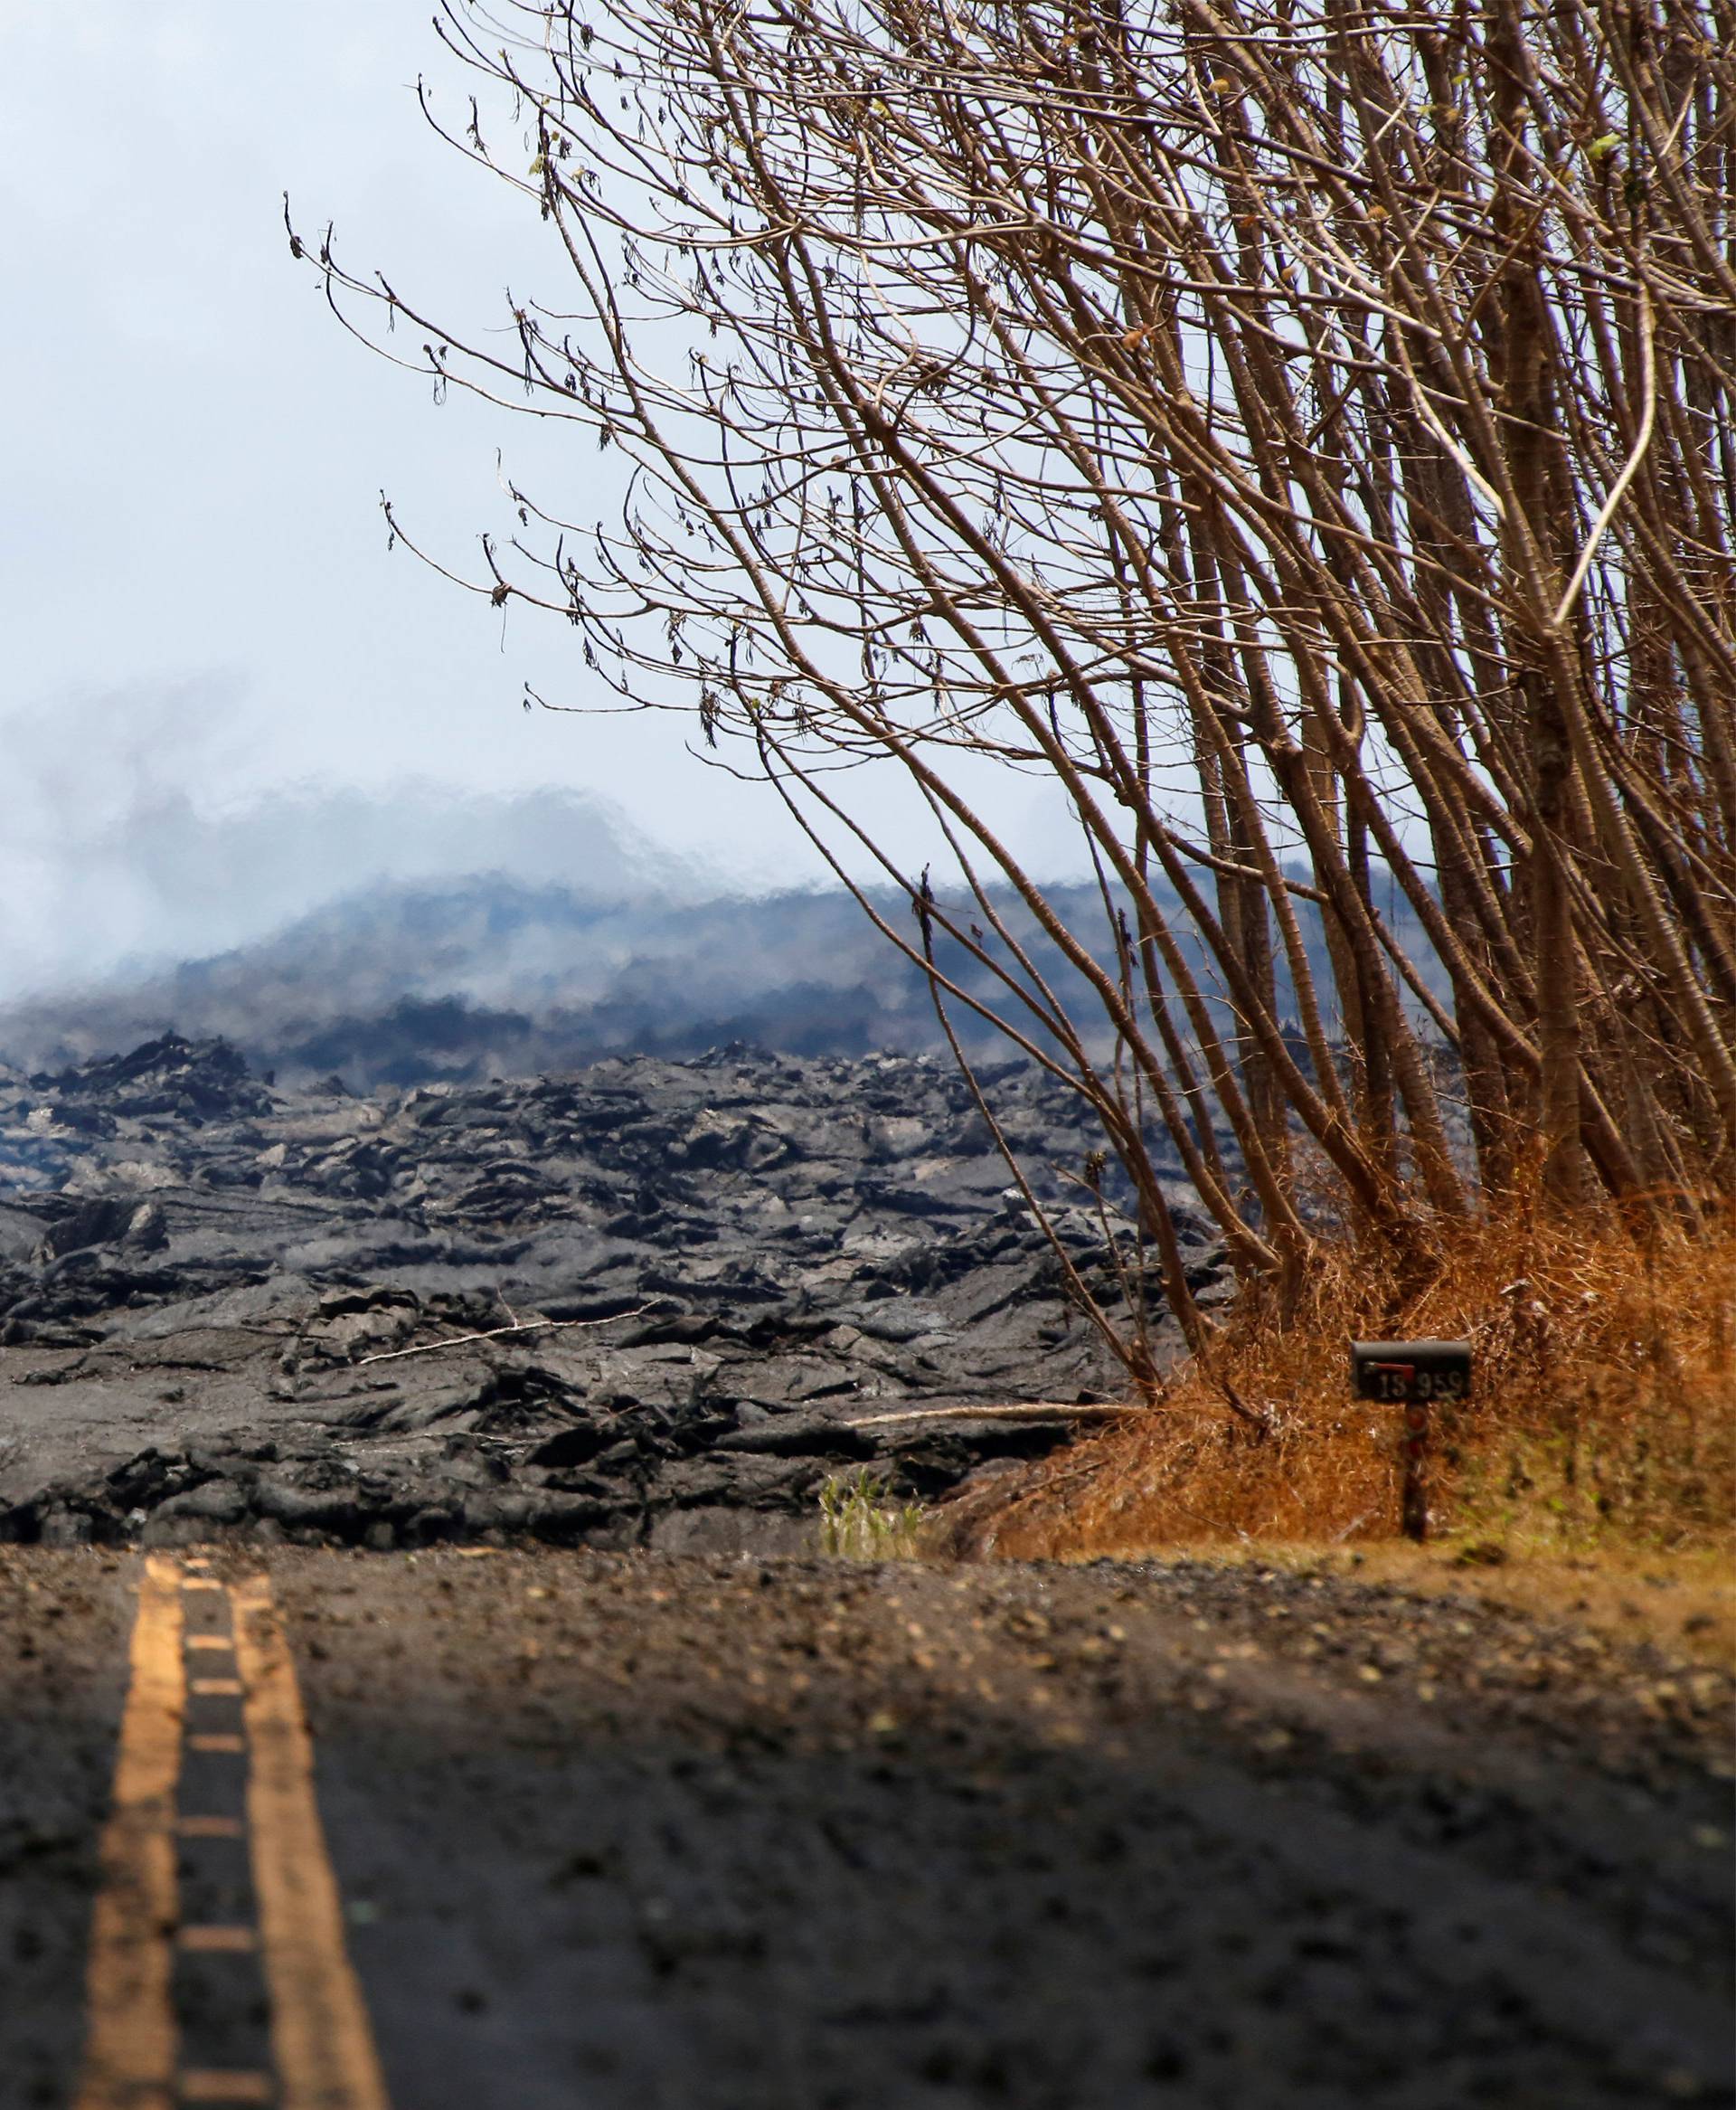 Soldiers from the Hawaii National Guard monitor sulfur dioxide gas levels near a lava flow in Leilani Estates during ongoing eruptions of the Kilauea Volcano in Hawaii